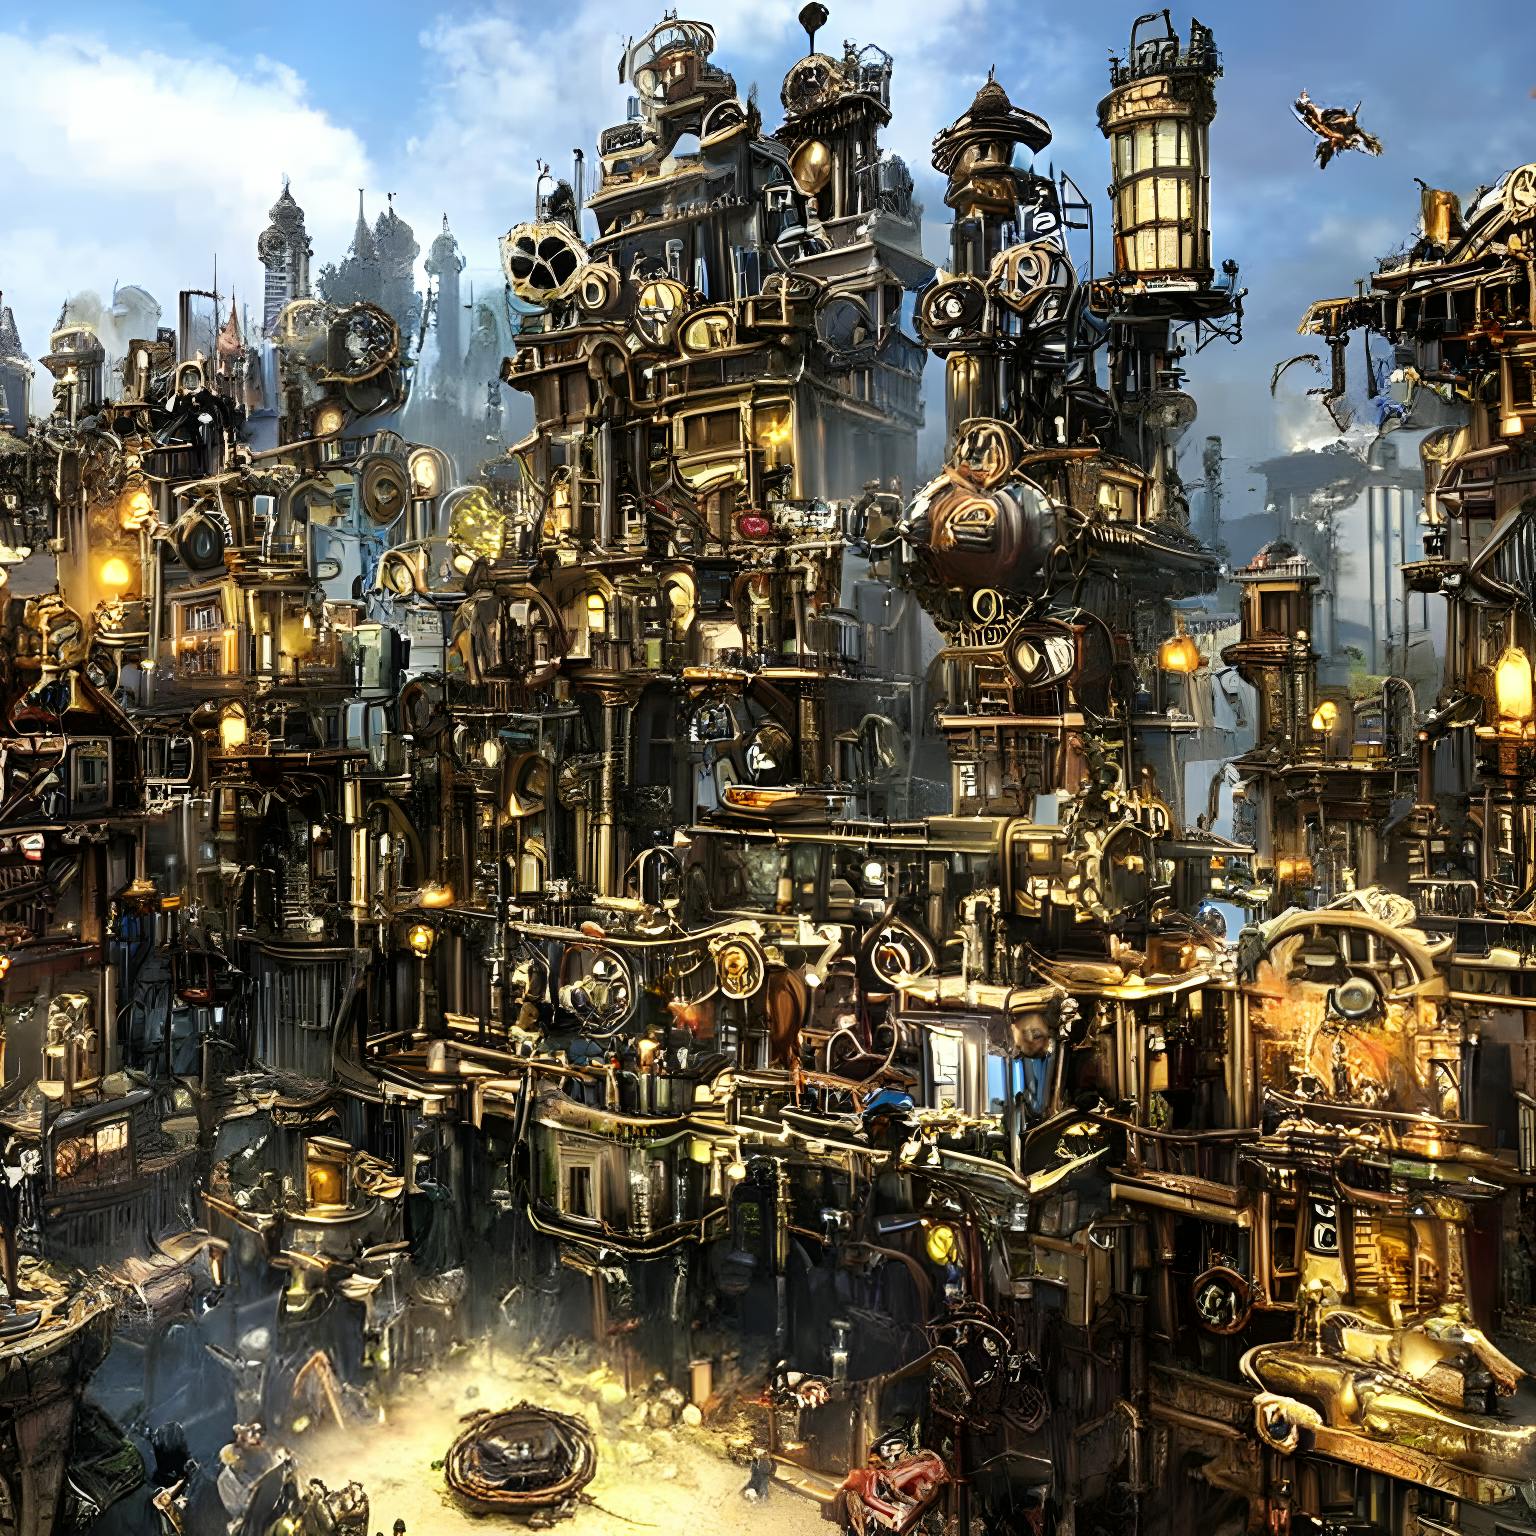 The History and Aesthetic of Steampunk: Could We Build a Steampunk